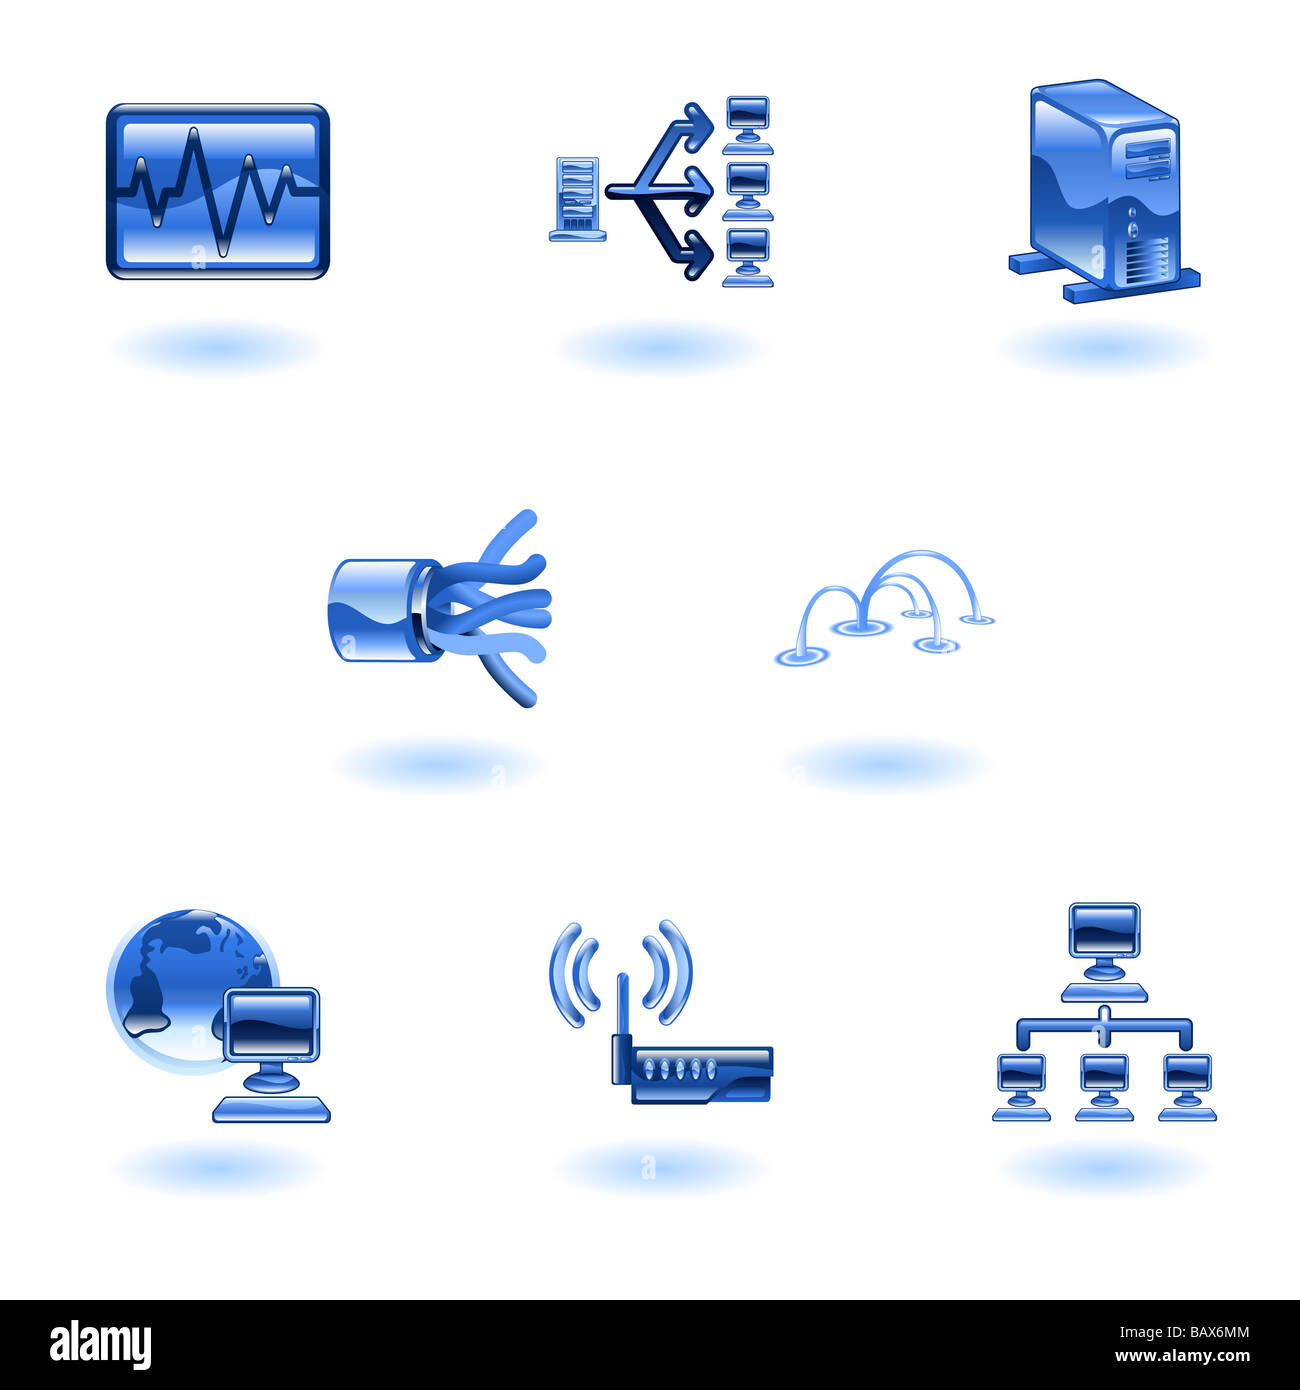 A glossy computer network and internet icon set Stock Photo